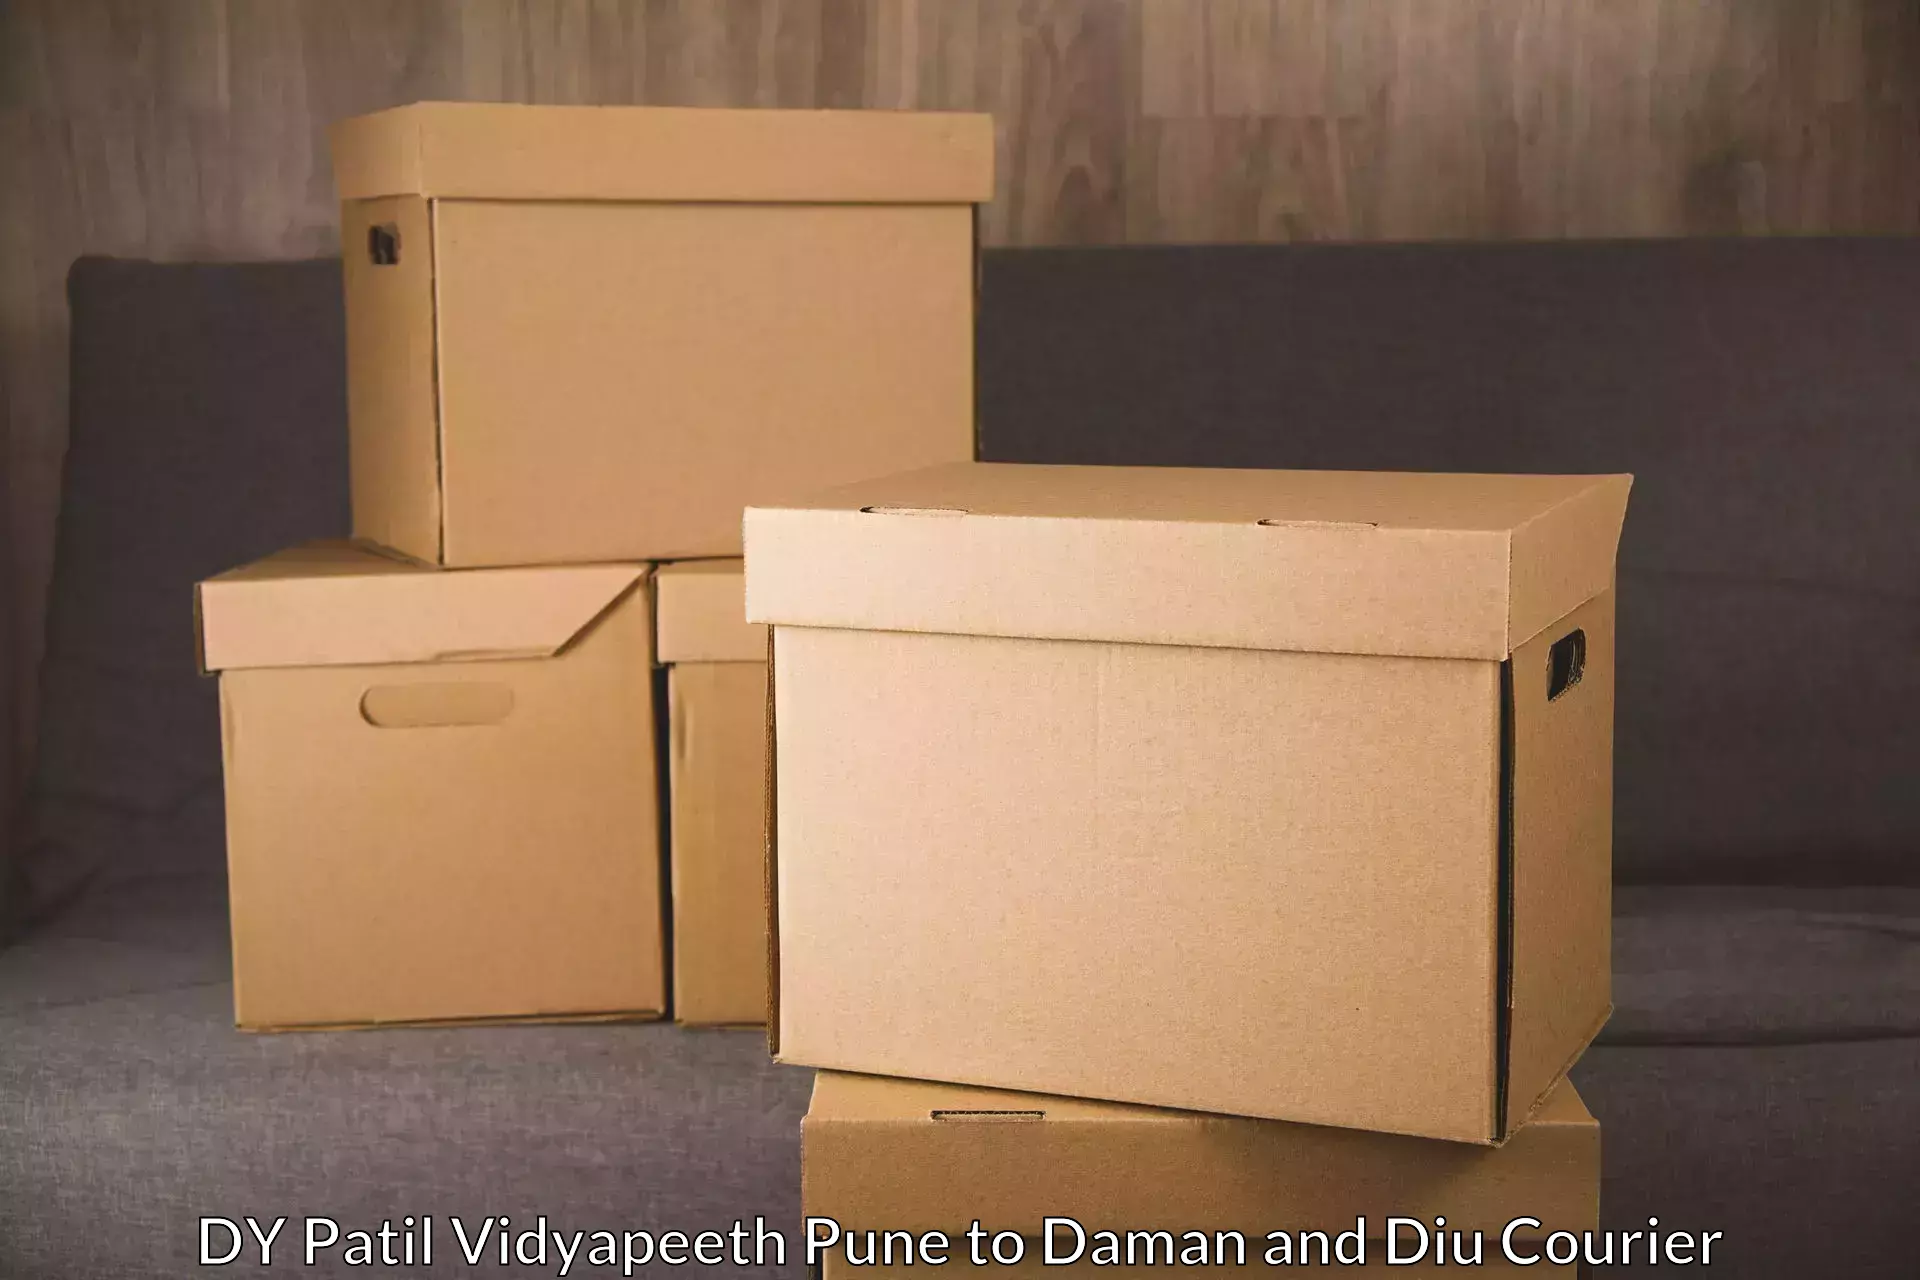 Global shipping solutions DY Patil Vidyapeeth Pune to Daman and Diu